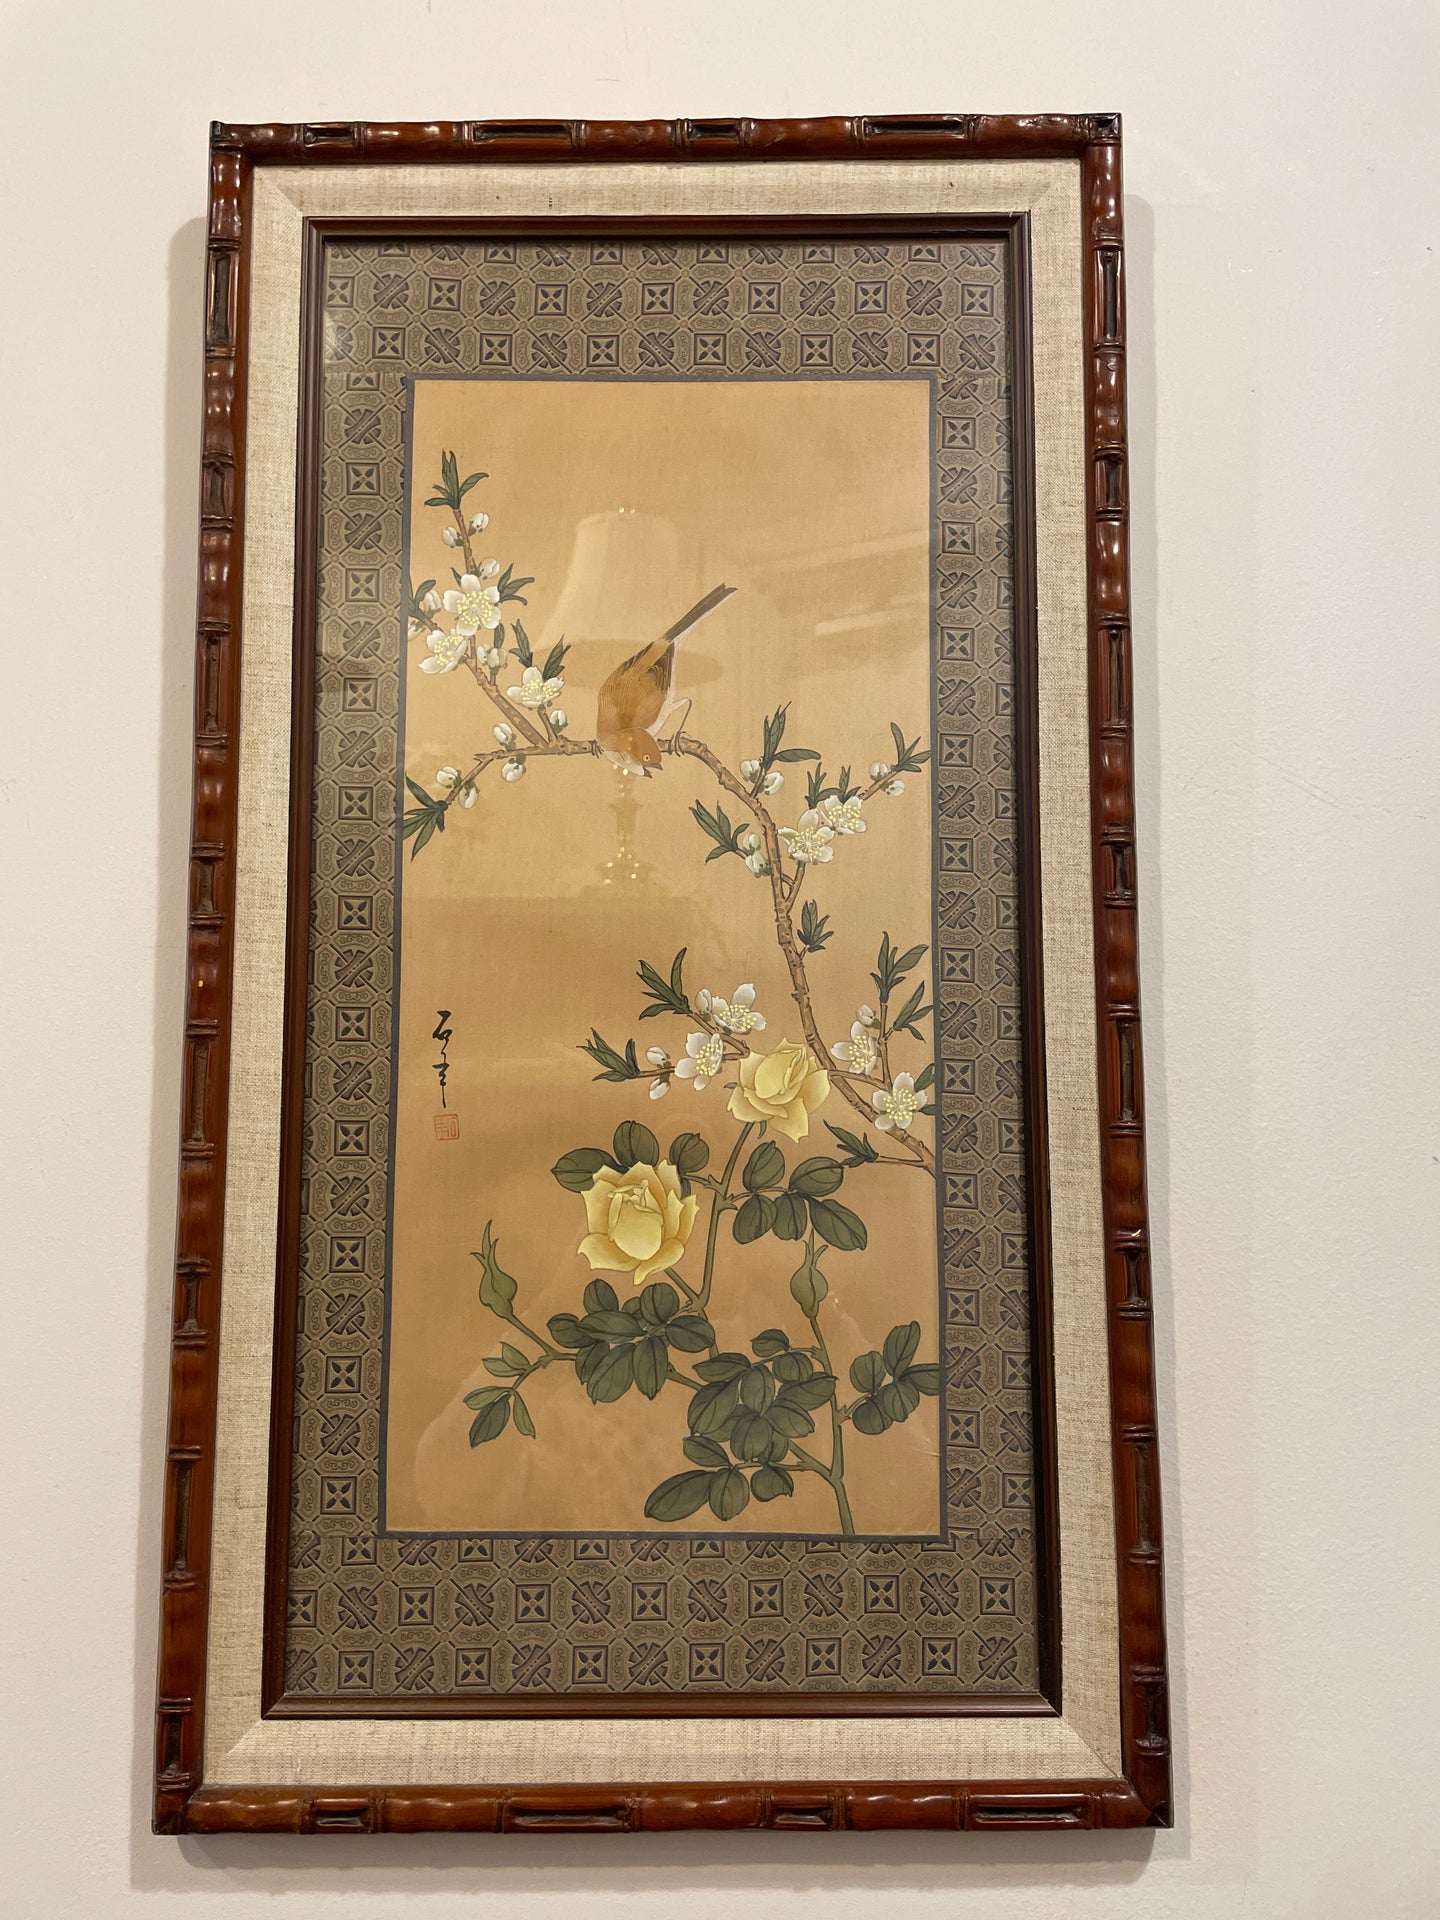 Silk Embroidery of Birds in Bamboo Frame